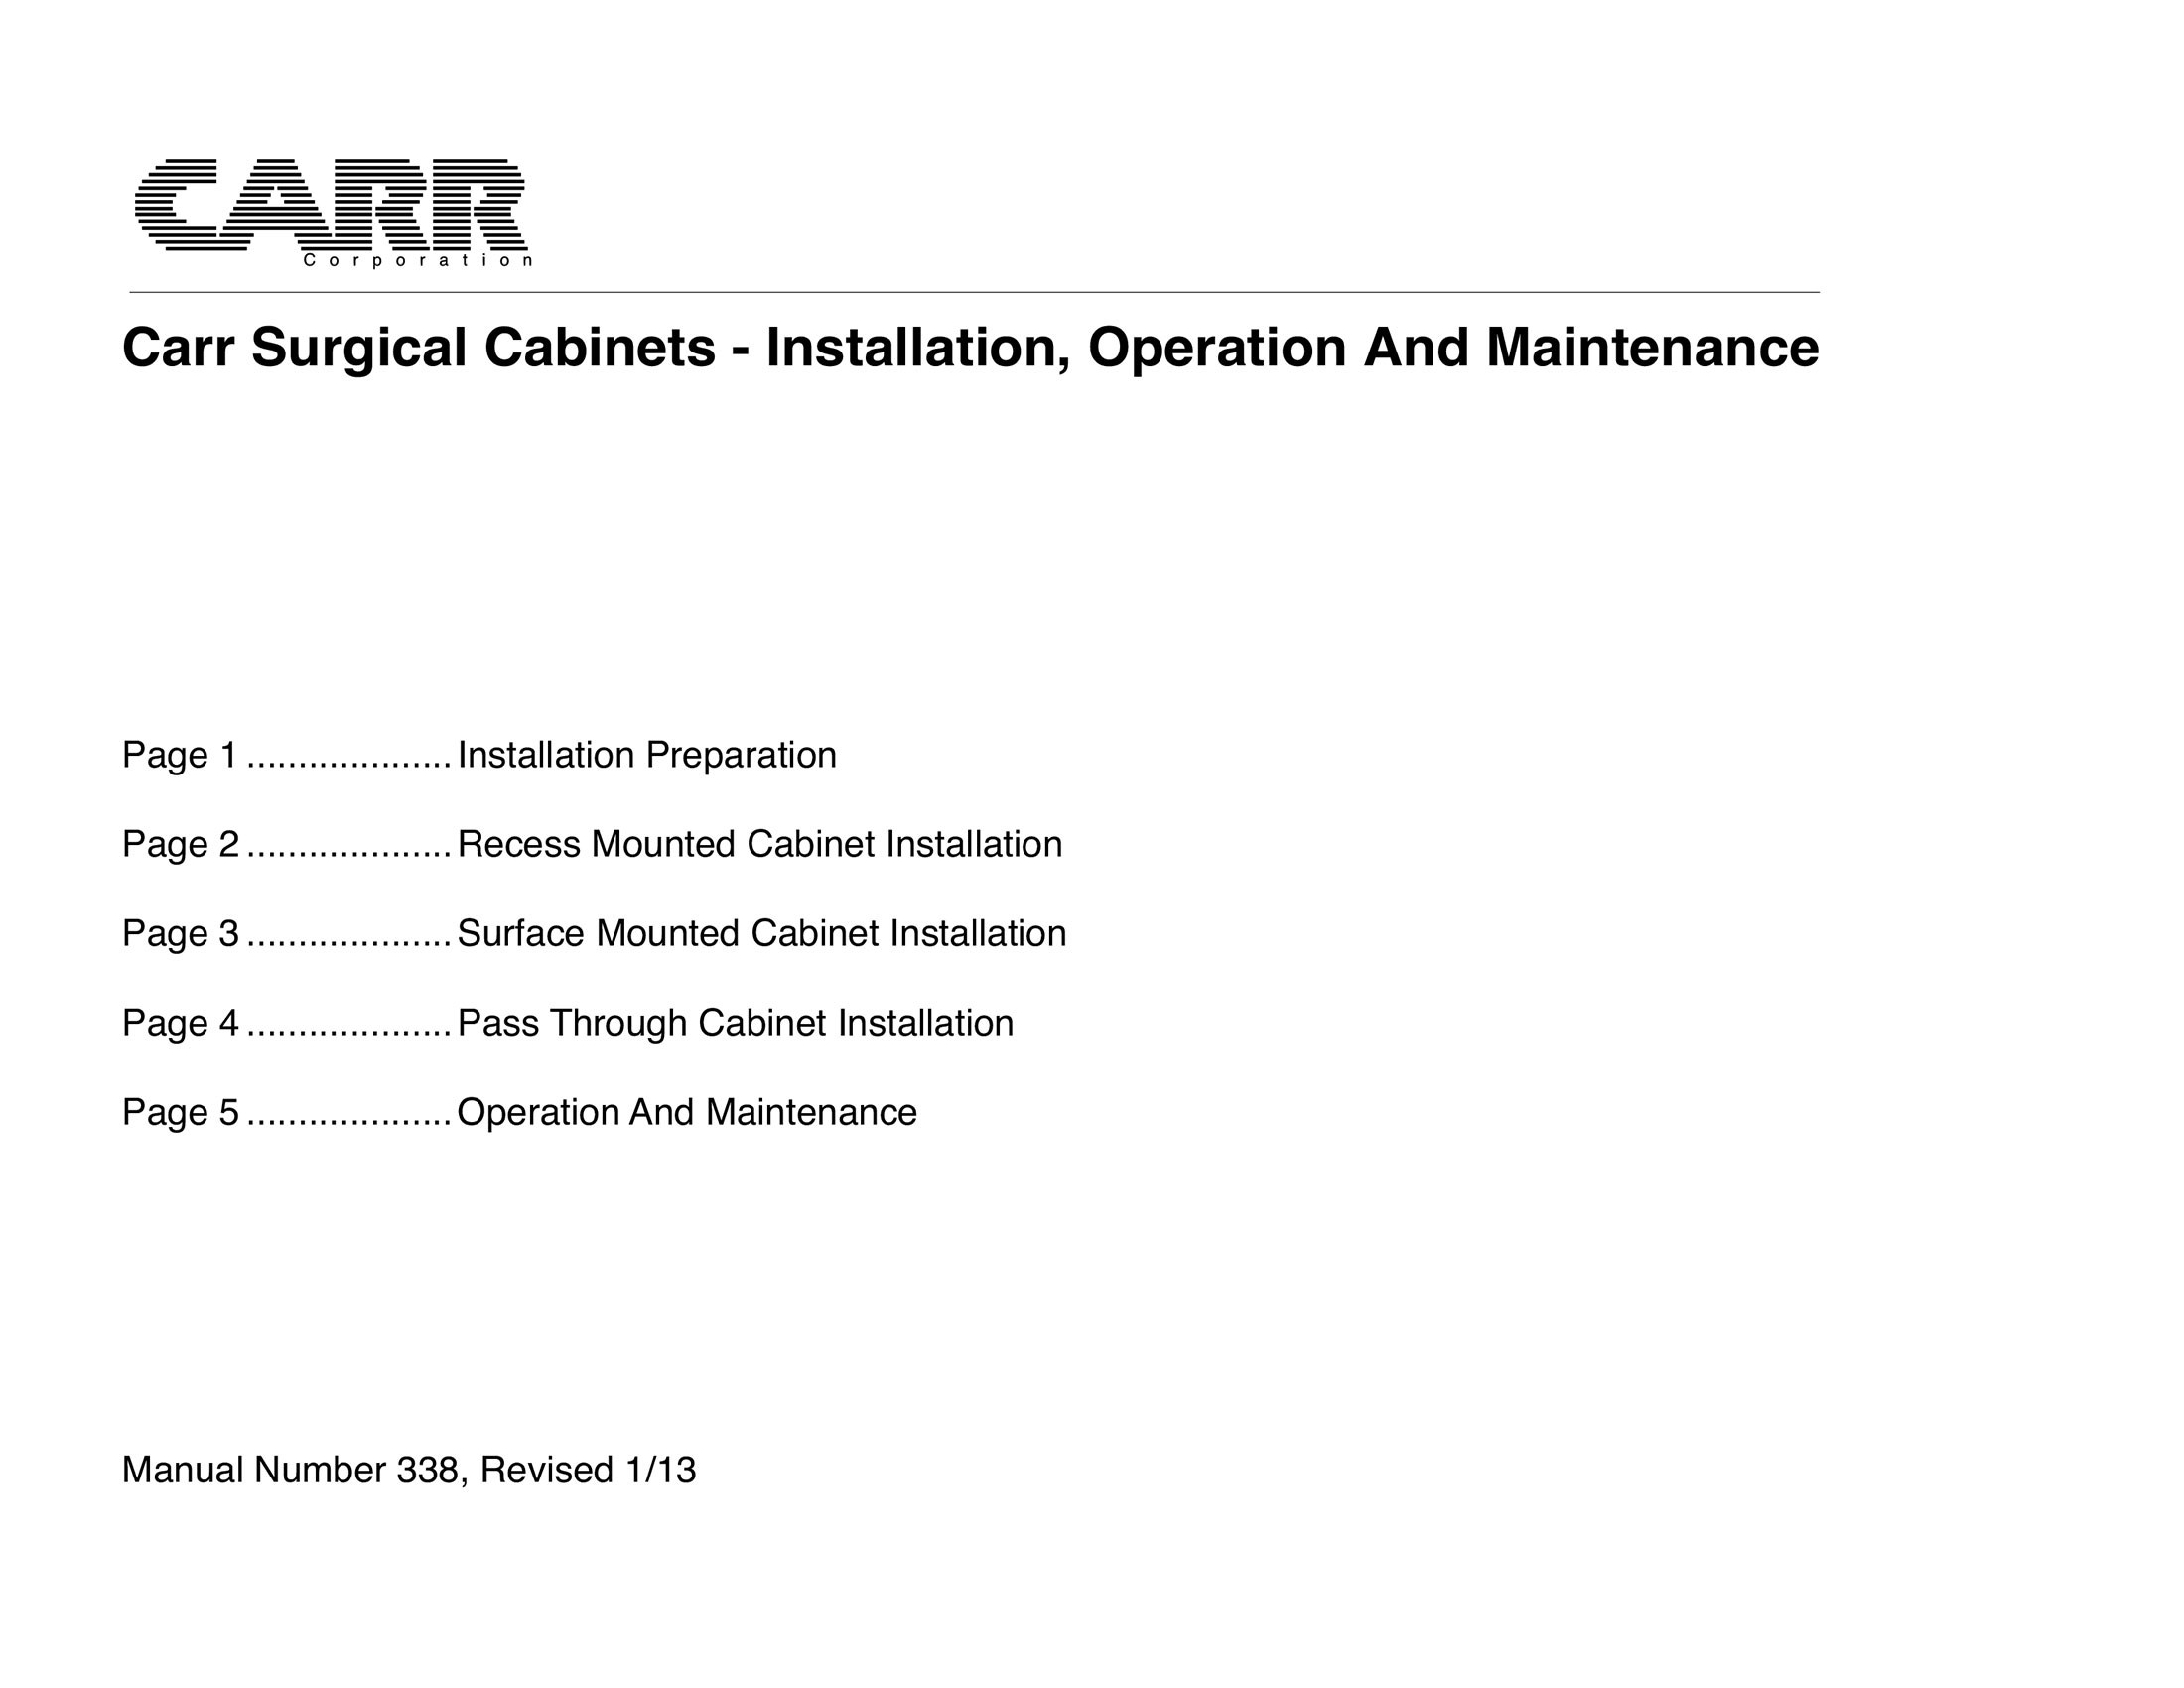 SDC: SURGICAL DESK / DRAWER CABINETS